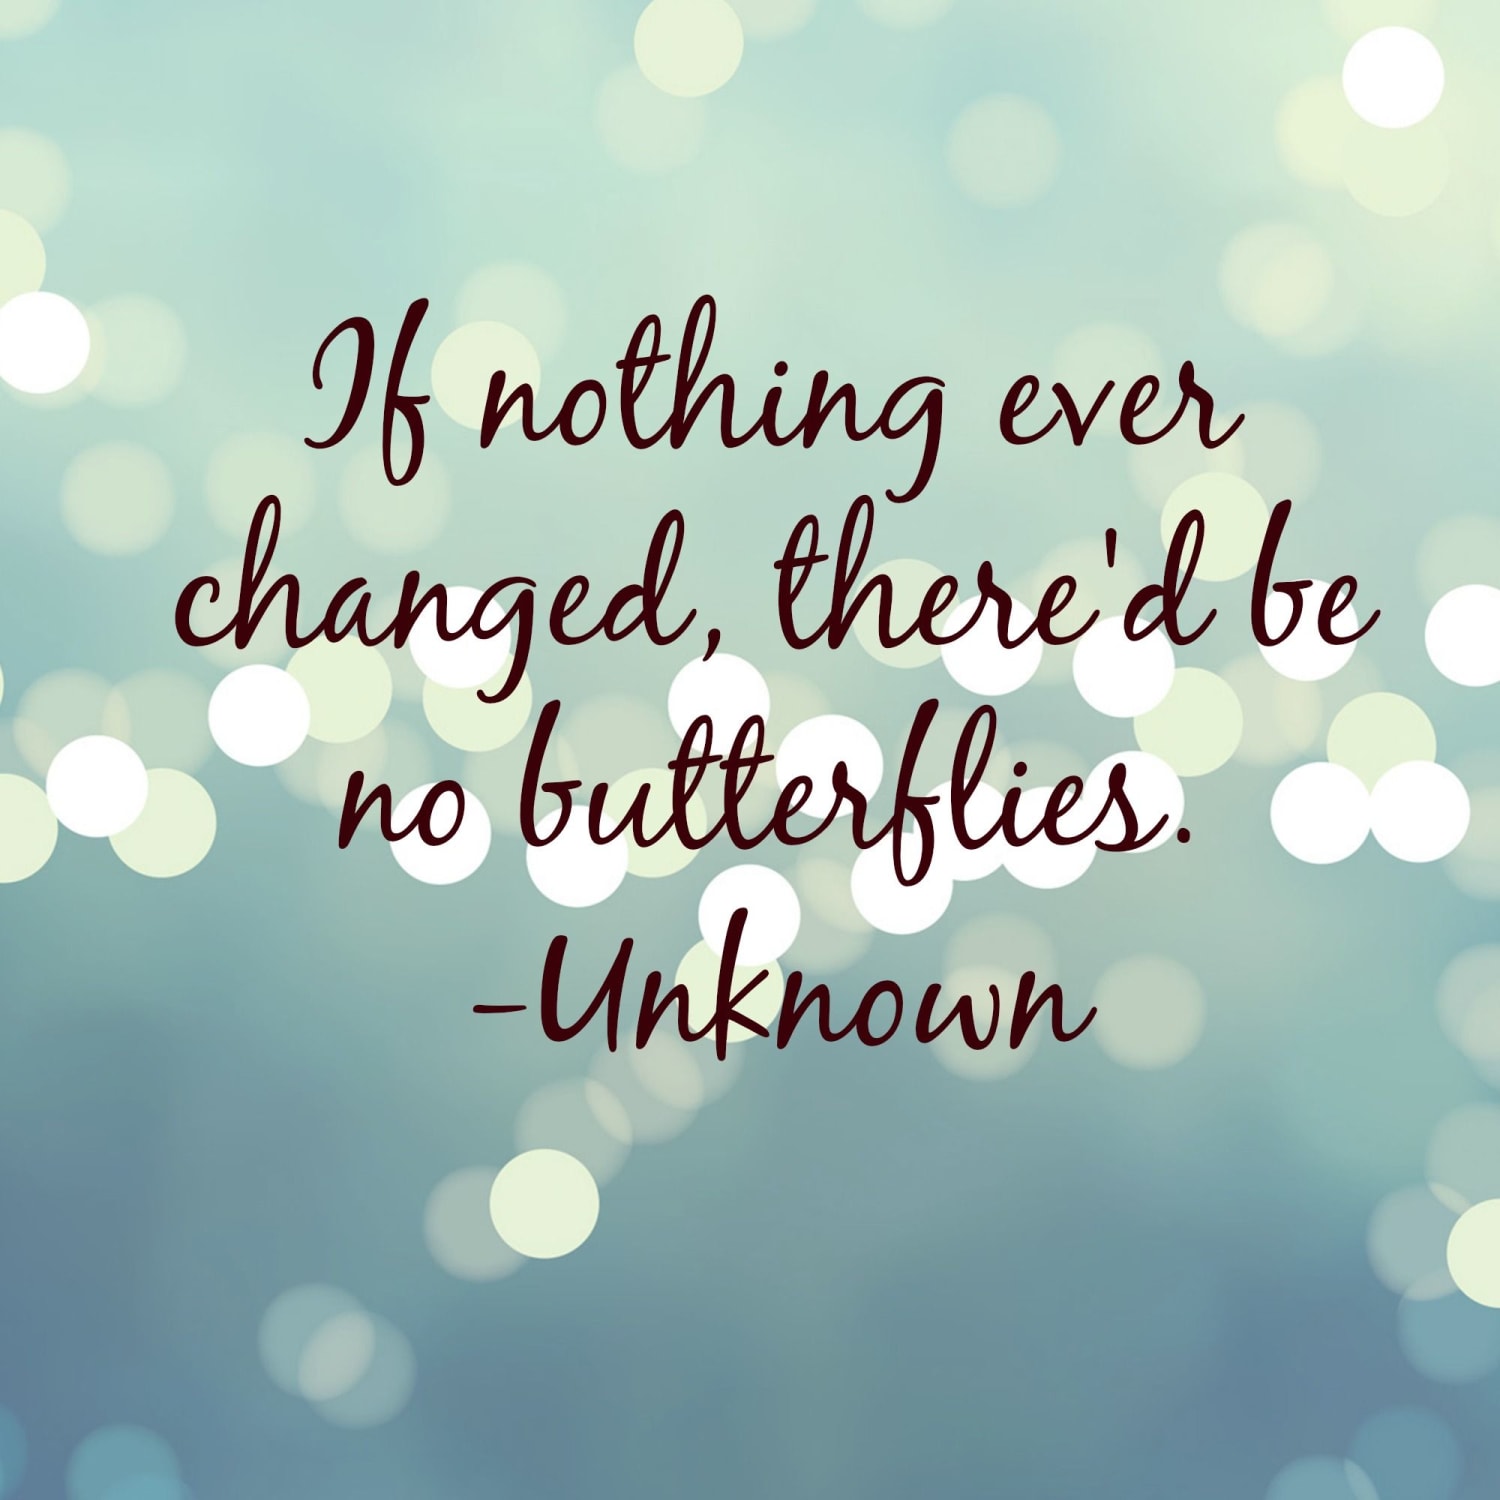 26 Inspiring Quotes About Change